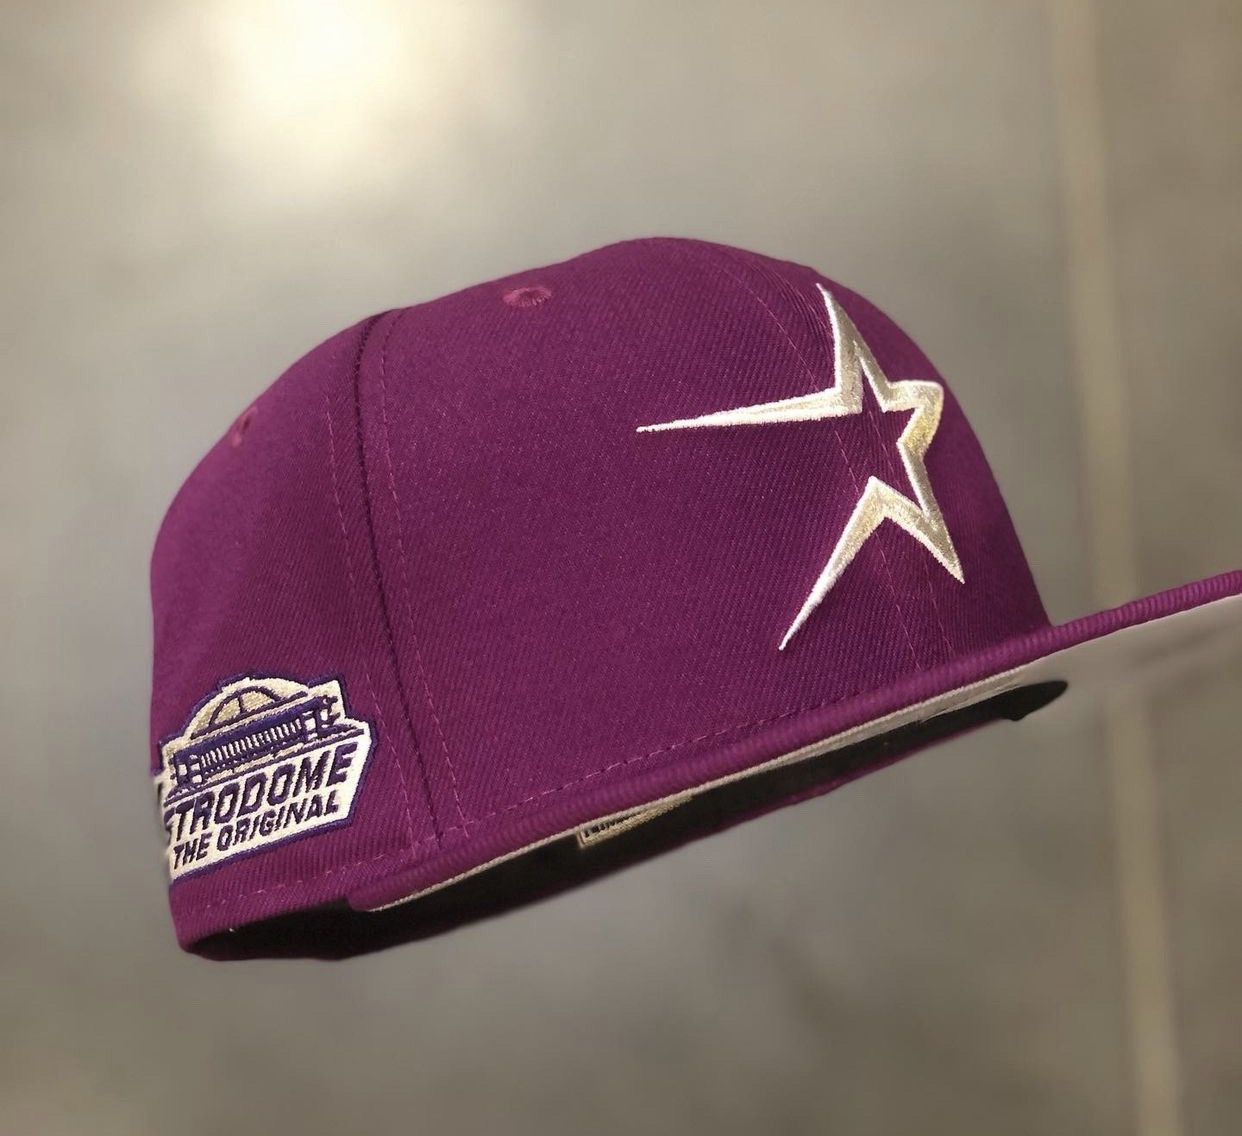 Selena Astros New Era Fitted Hat comes with 1 free mystery pin